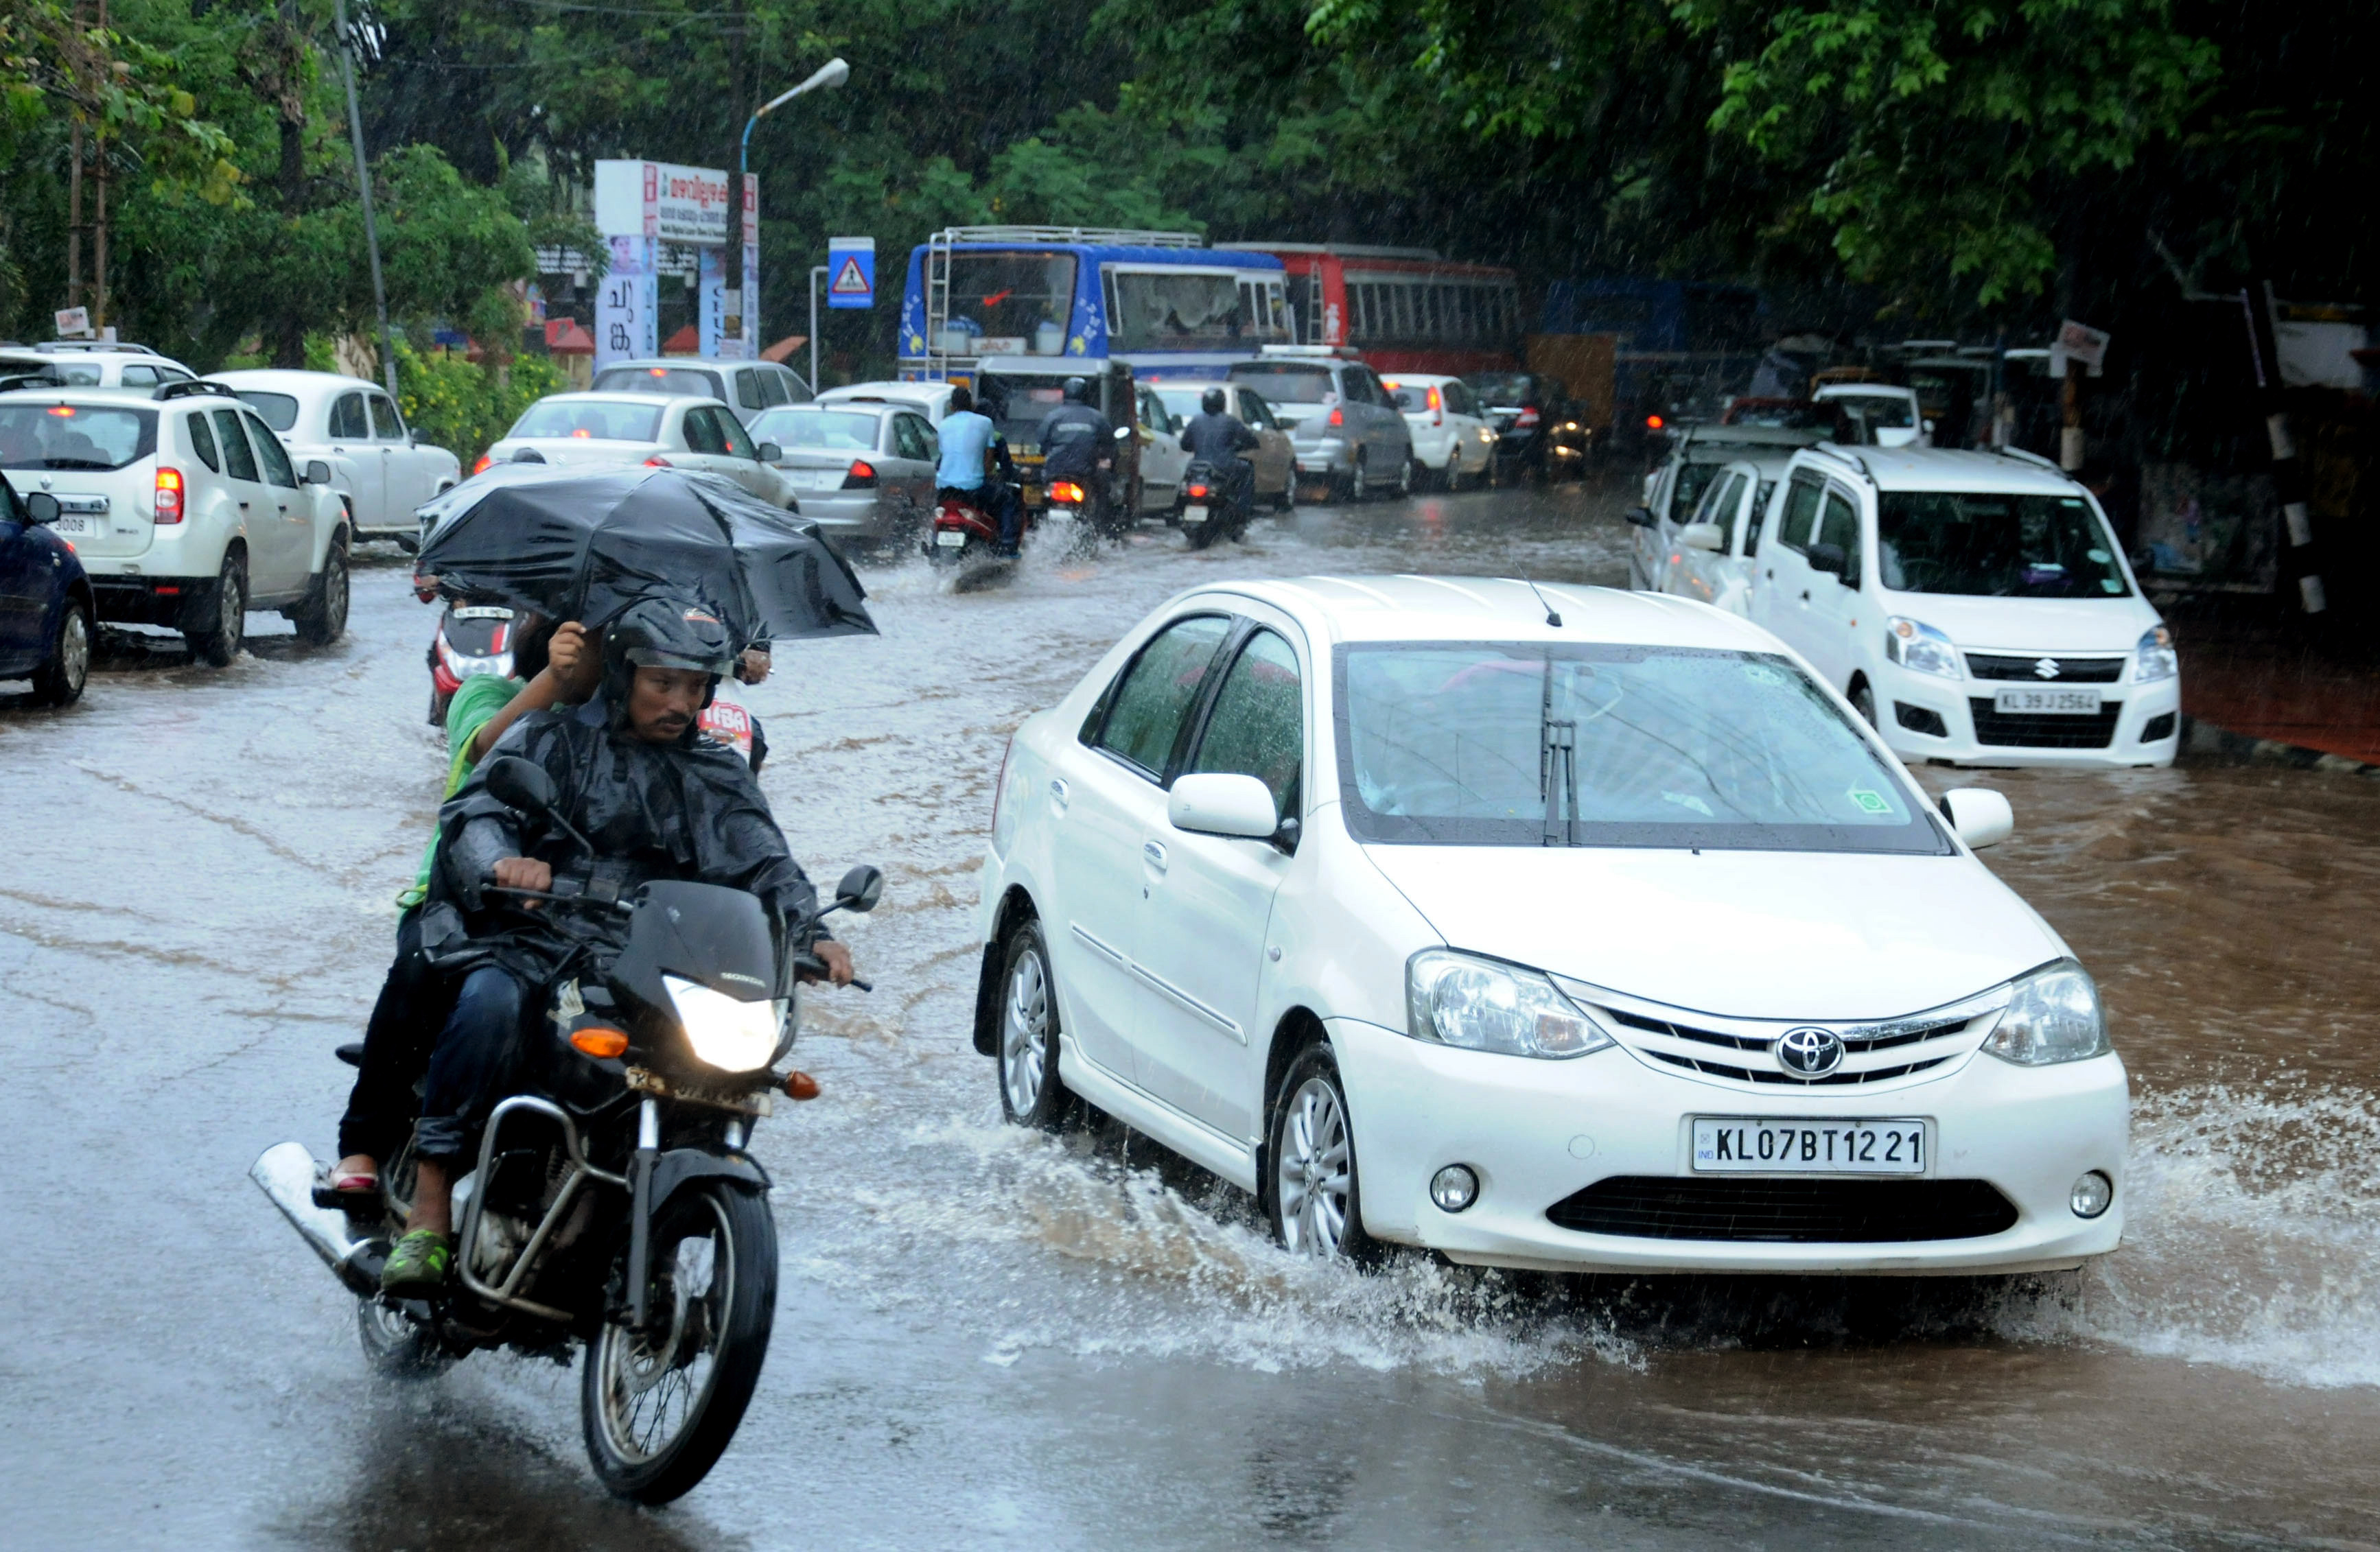 (FILES) This file photograph taken on June 8, 2016, shows Indian commuters as they make their way along a waterlogged road during heavy monsoon rains in Kochi. Scientists from Britain and India will release underwater robots into the Bay of Bengal in a bid to more accurately predict the Indian monsoon which is critical to millions of farmers, they said June 14, 2016. / AFP PHOTO / STR